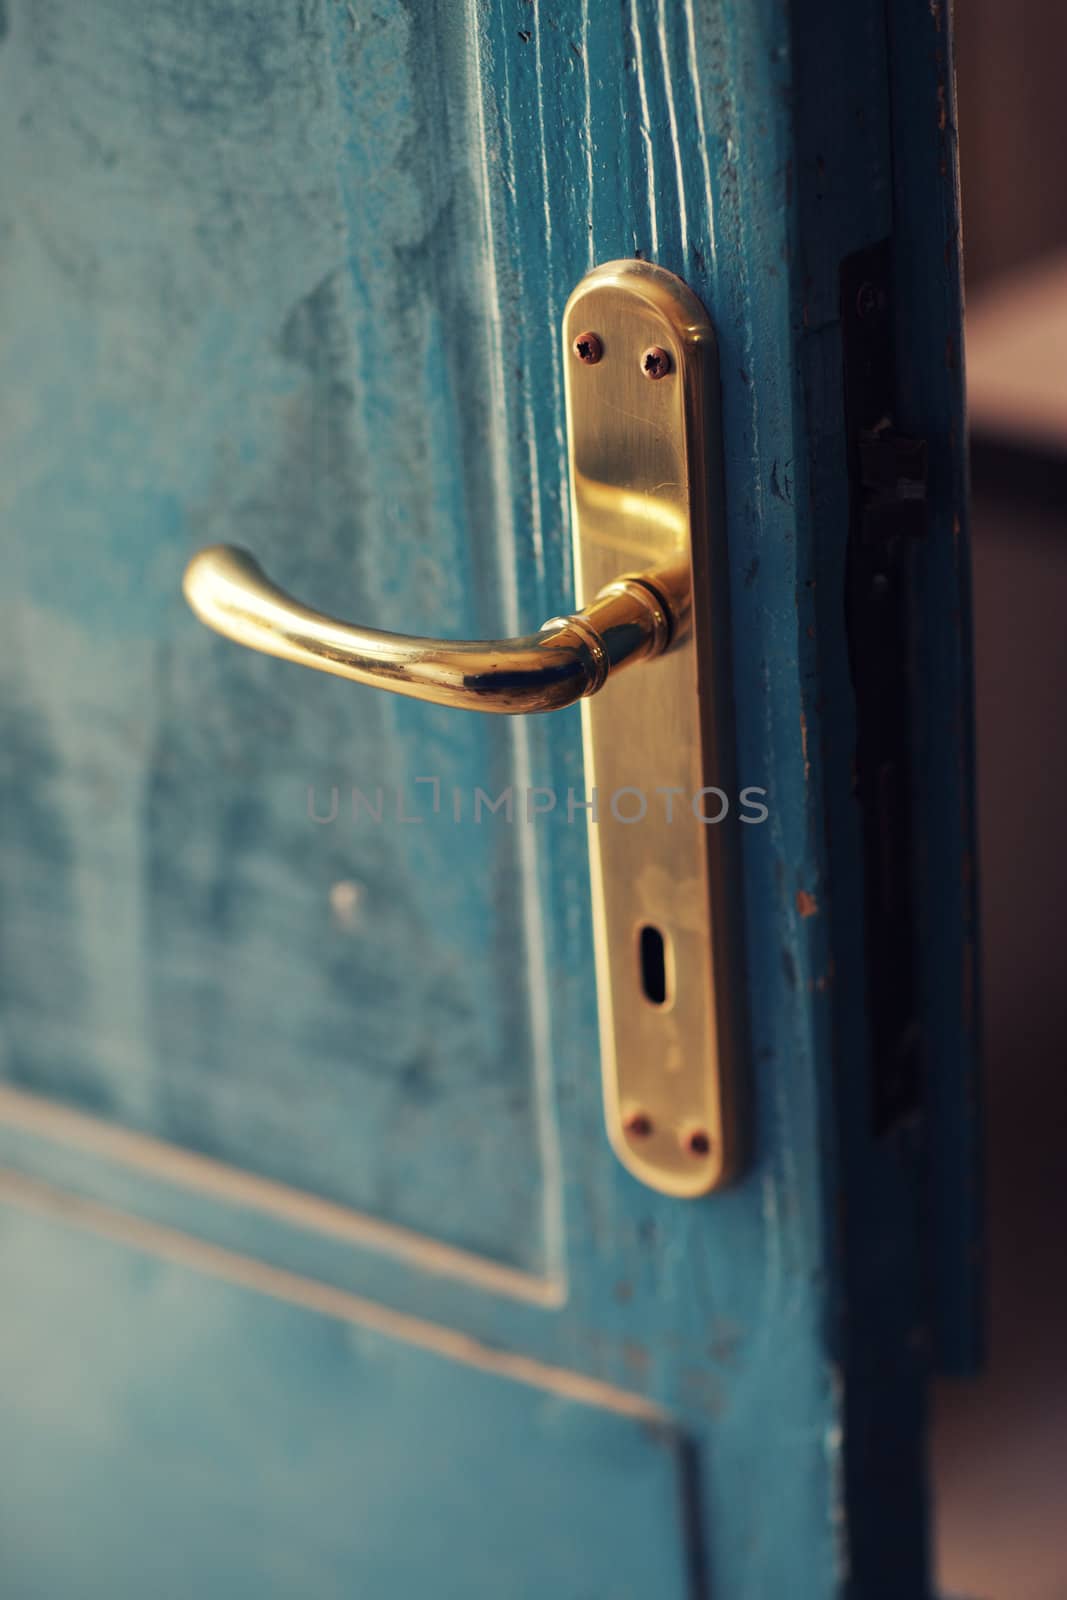 Door opening in a misterious room, handle close up